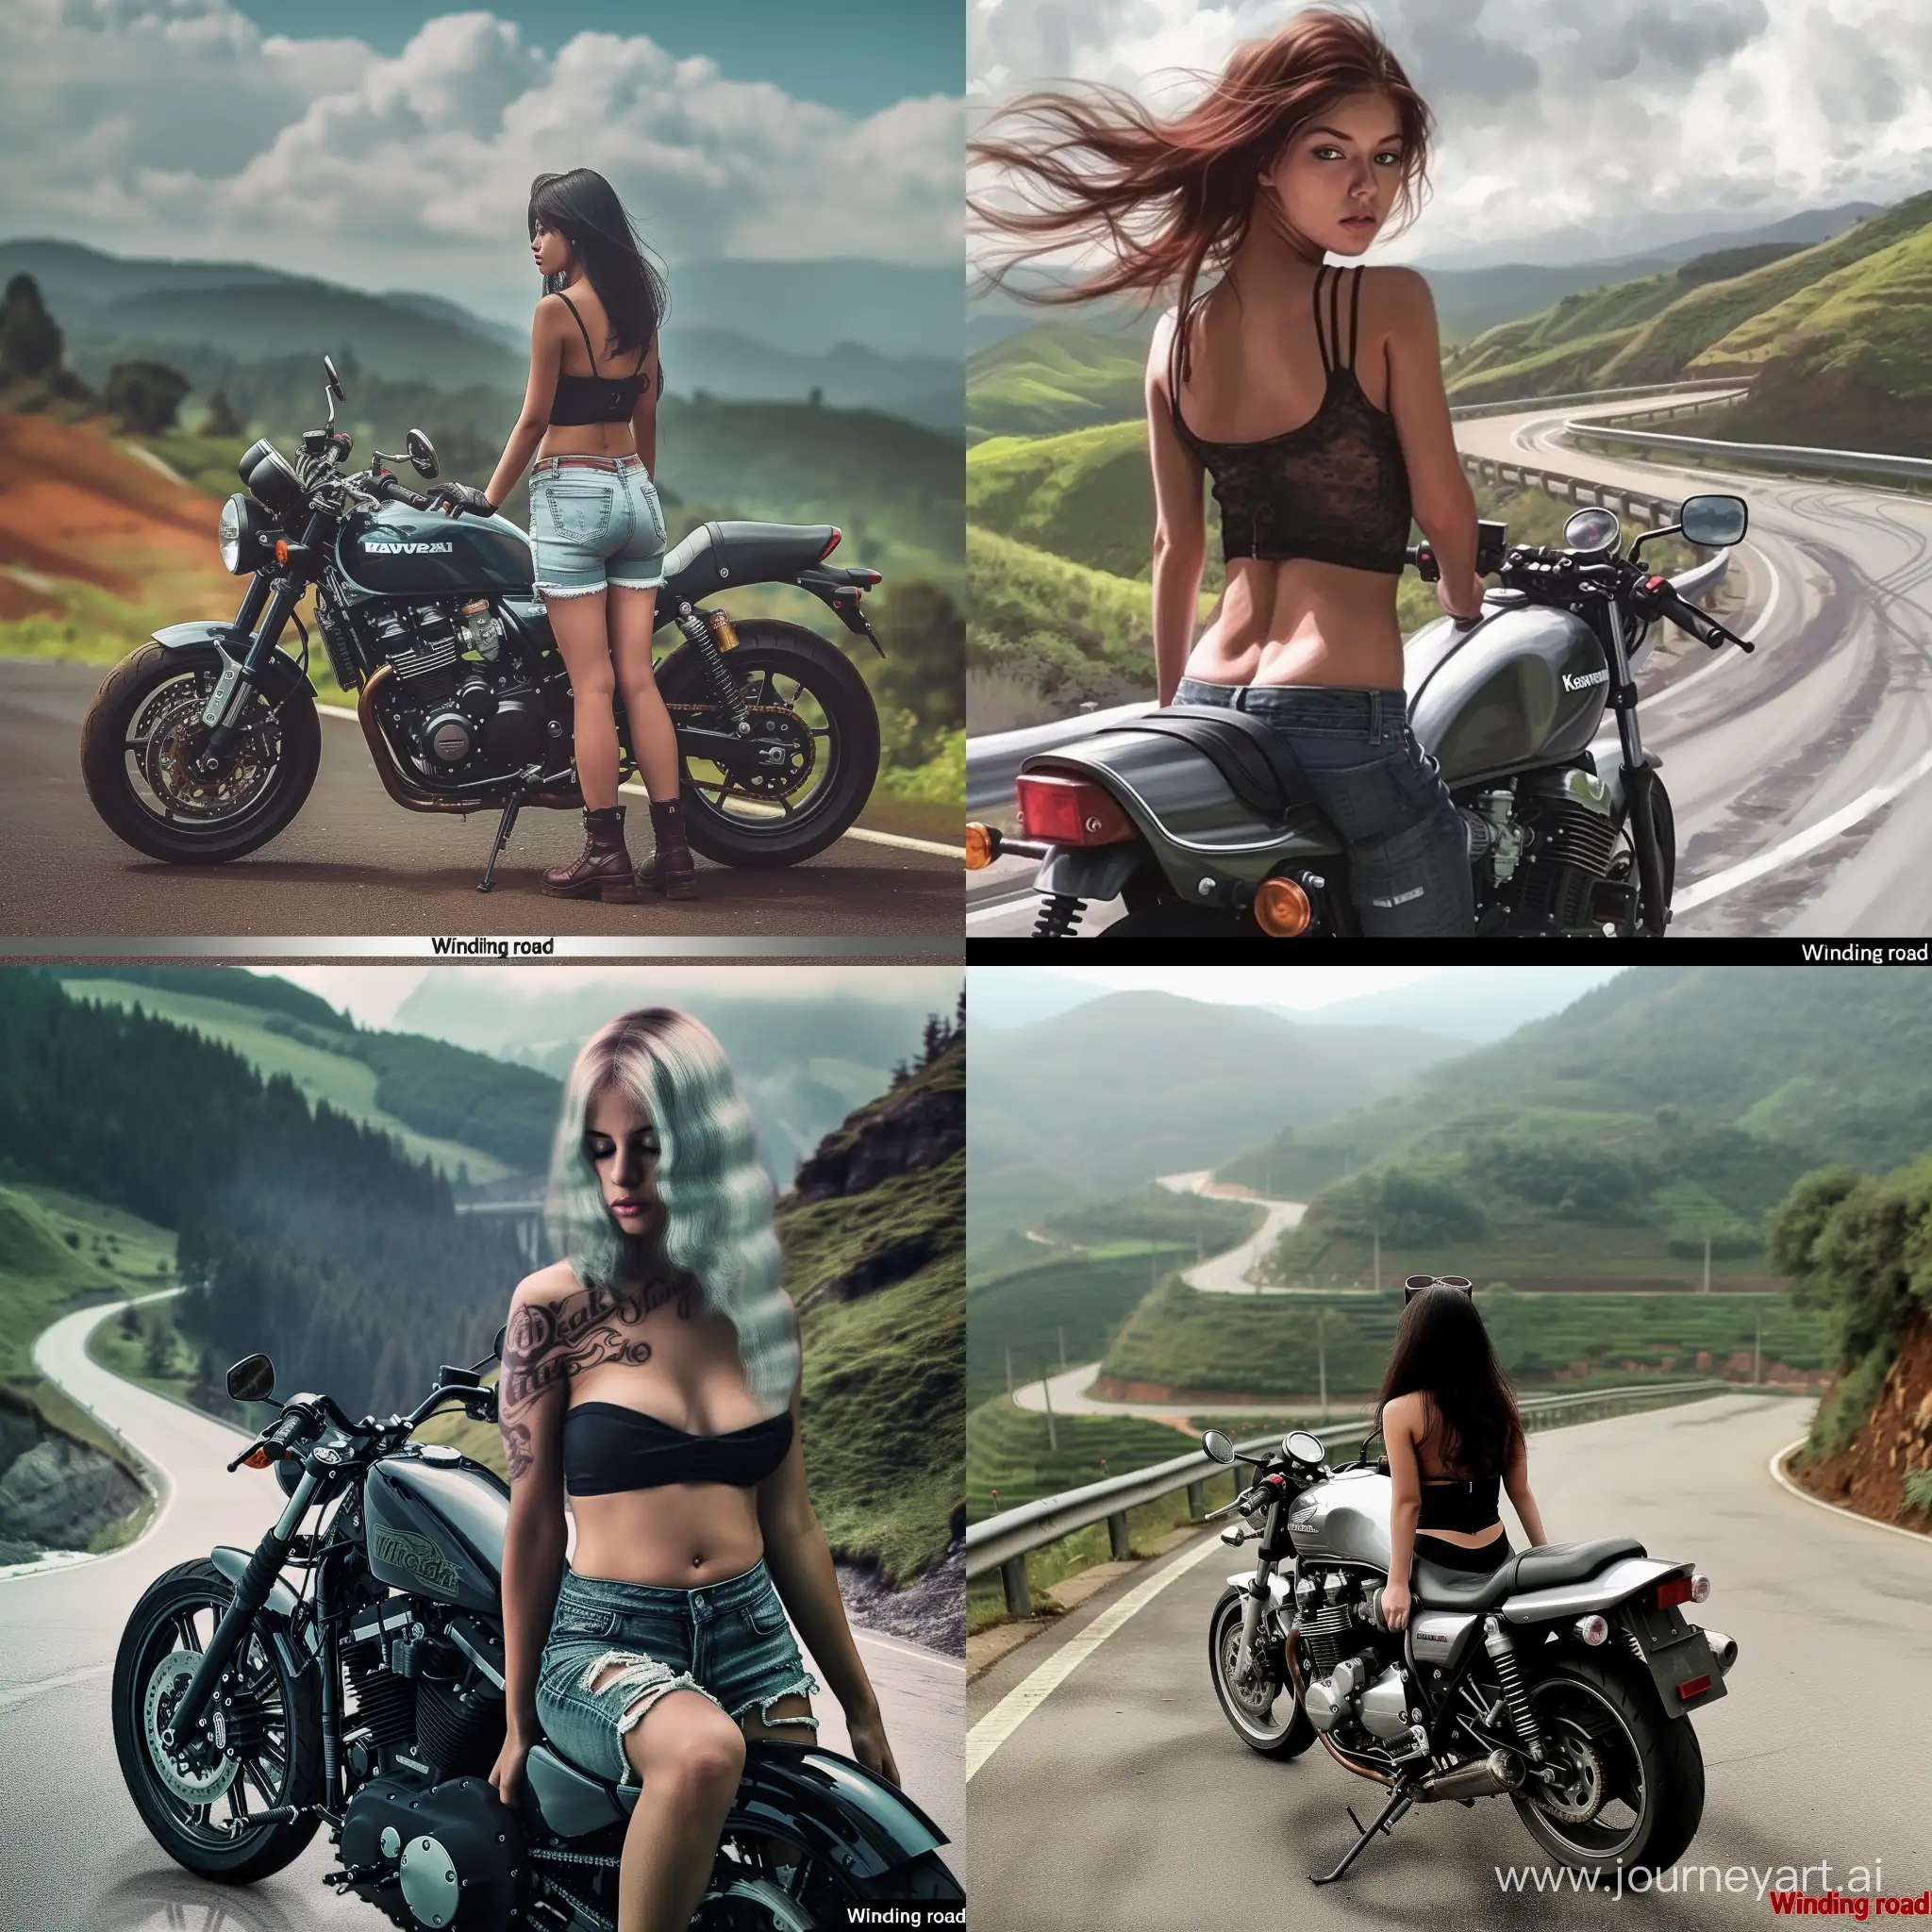 (Motion effect:1.5)、（Motion blur:1.4）parchment、absurderes、Hyper-Resolution、ultra - detailed、（bokeh dof:1.8）、Accurate depiction、Beautiful depiction、down view、beuaty girl、big breasts thin waist、The roar of a motorcycle engine、
Challenging the moment of winding roads。
The wind caressed my hair、The landscape unfolds vividly
Asphalt tracks、Free invitation。

Winding road、Fluctuations in elevation differences
The rider's heart beats with adrenaline。
Go through the curve、Walk through the valley
Natural beauty、The attraction continues。

The blue of the sky、mont々Green、River flow
《Winding road》poetry。
Motorcycles and riders、Become one
Freedom and adventure、Illuminate the mind。